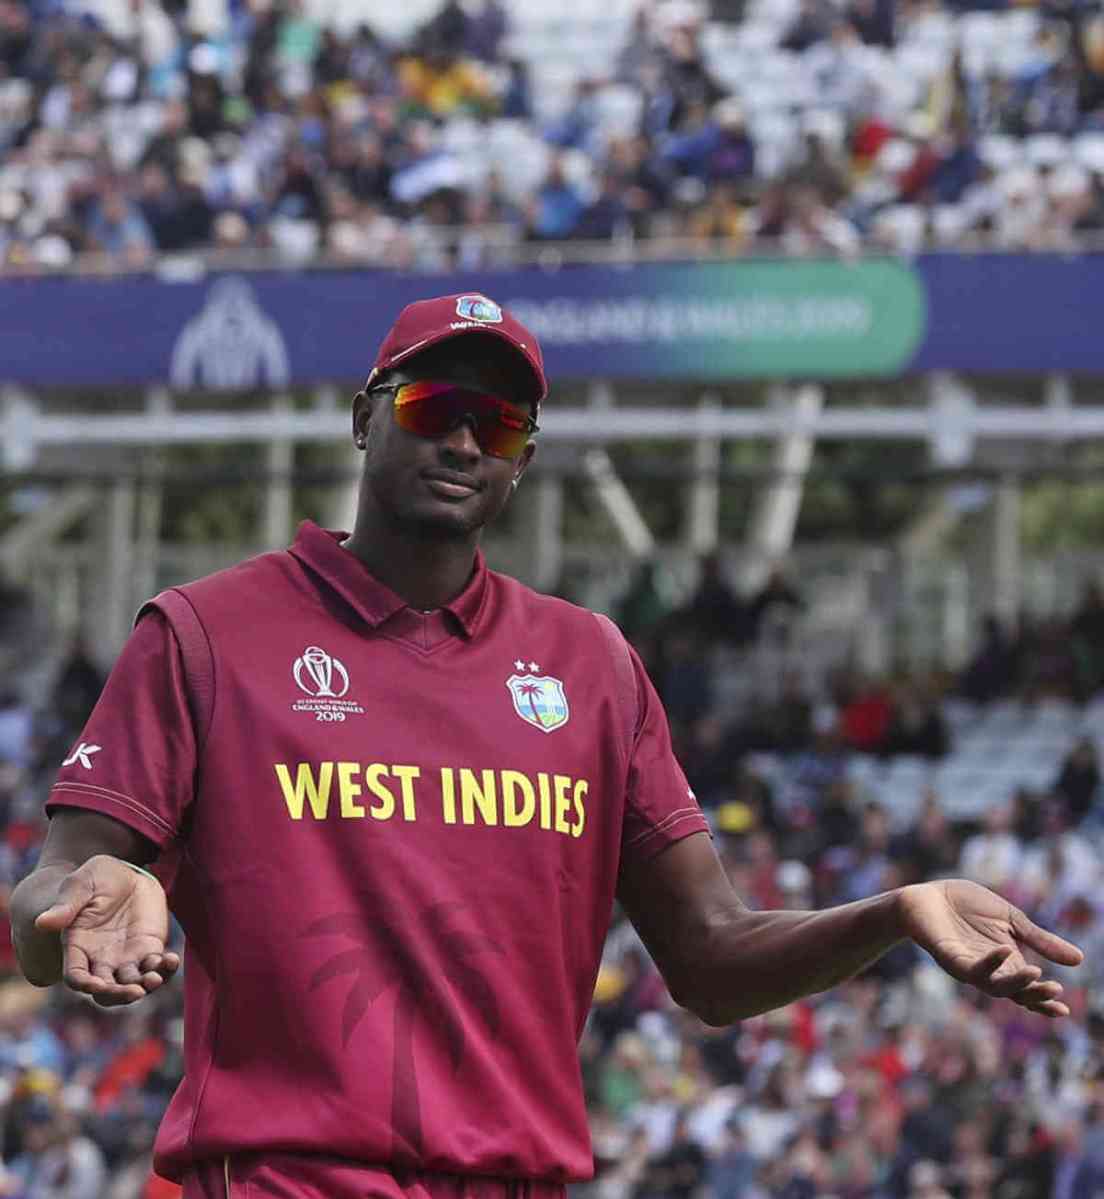 West Indies Player of the Year|West Indies Player of the Year